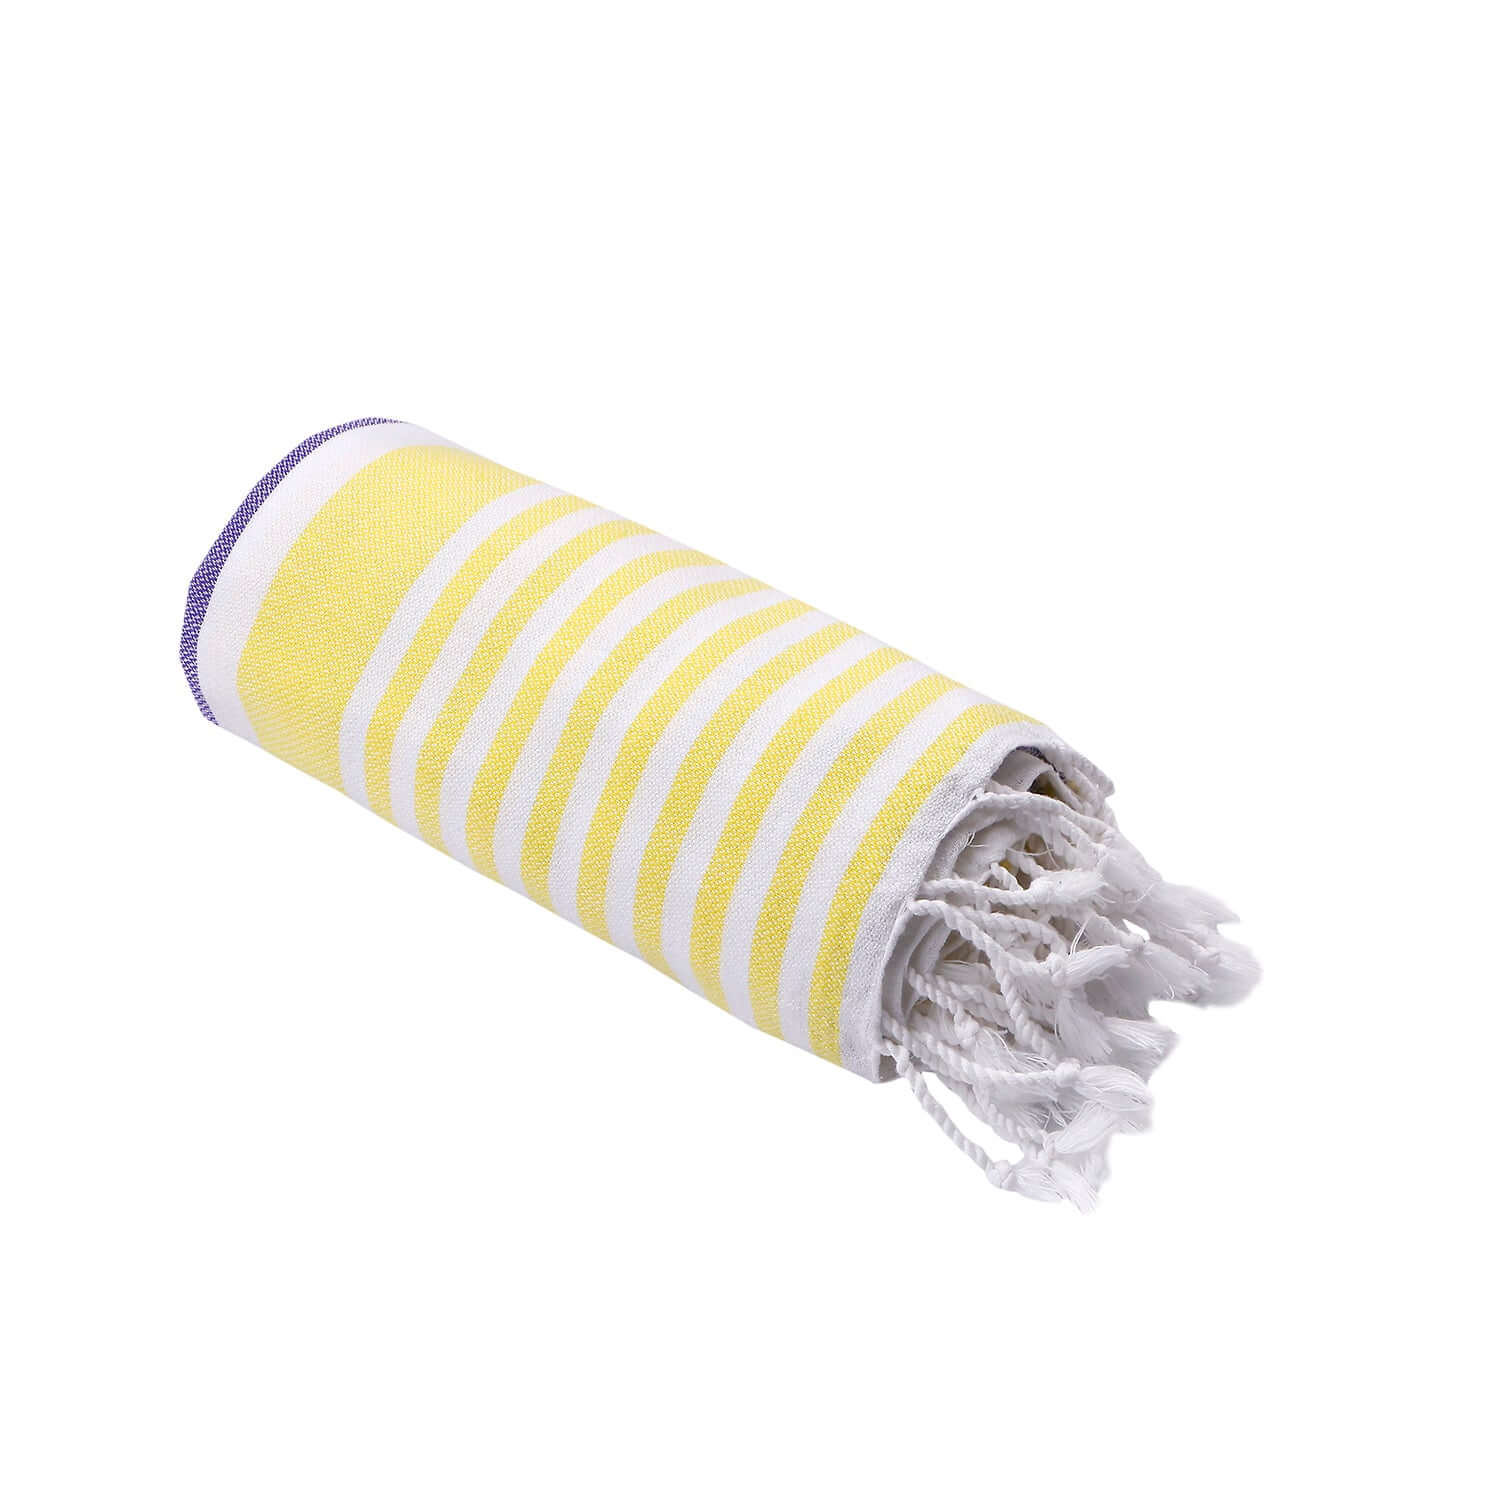 Rolled-up Loom Legacy purple and yellow beach towel with subtle white vertical stripes. One end of the towel showcases fringed white tassels, all presented against a white background.